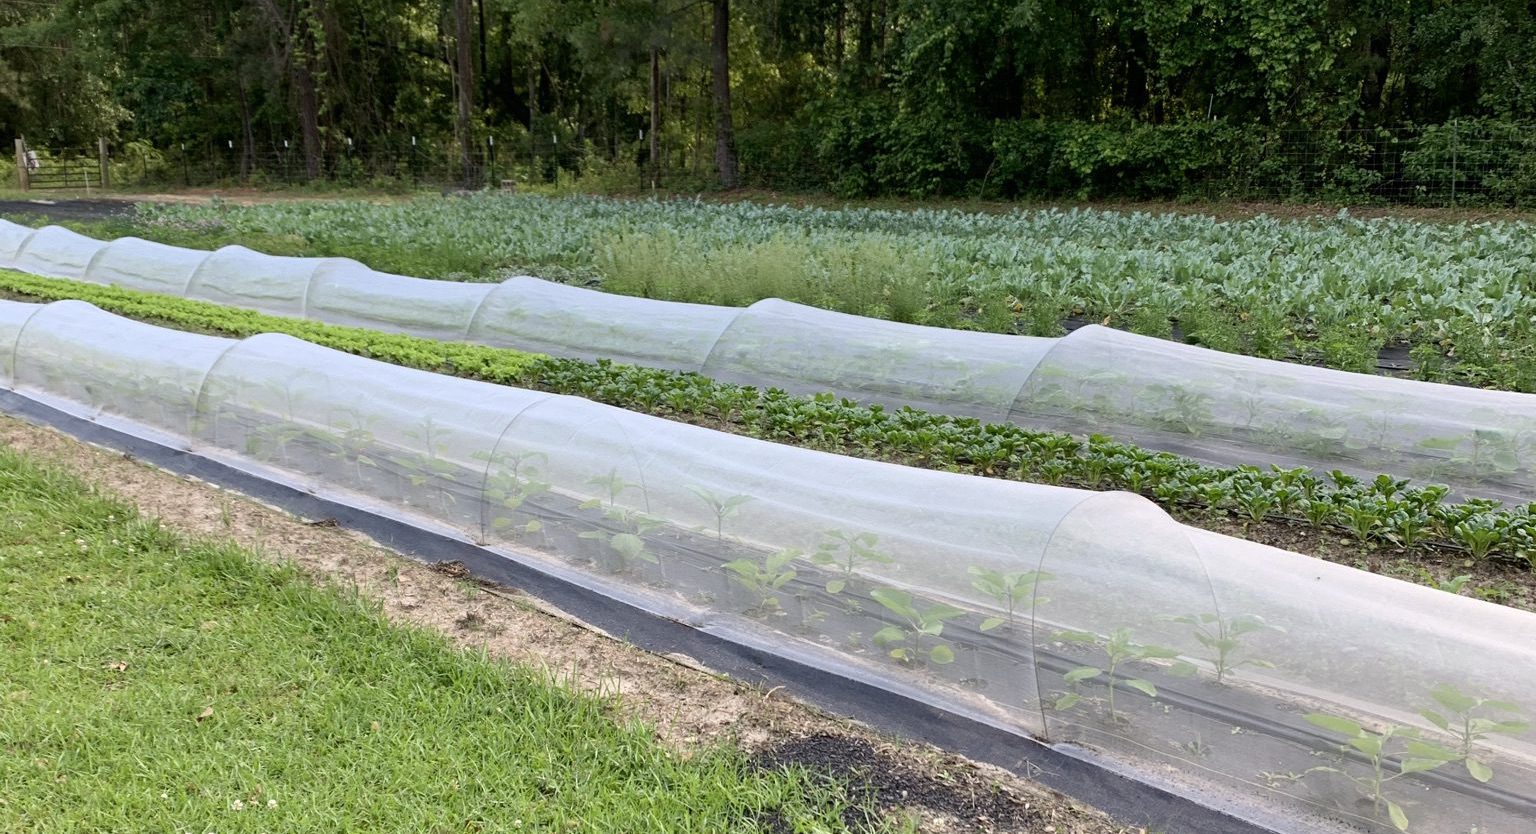 A tunnel exclusion system over a vegetable garden